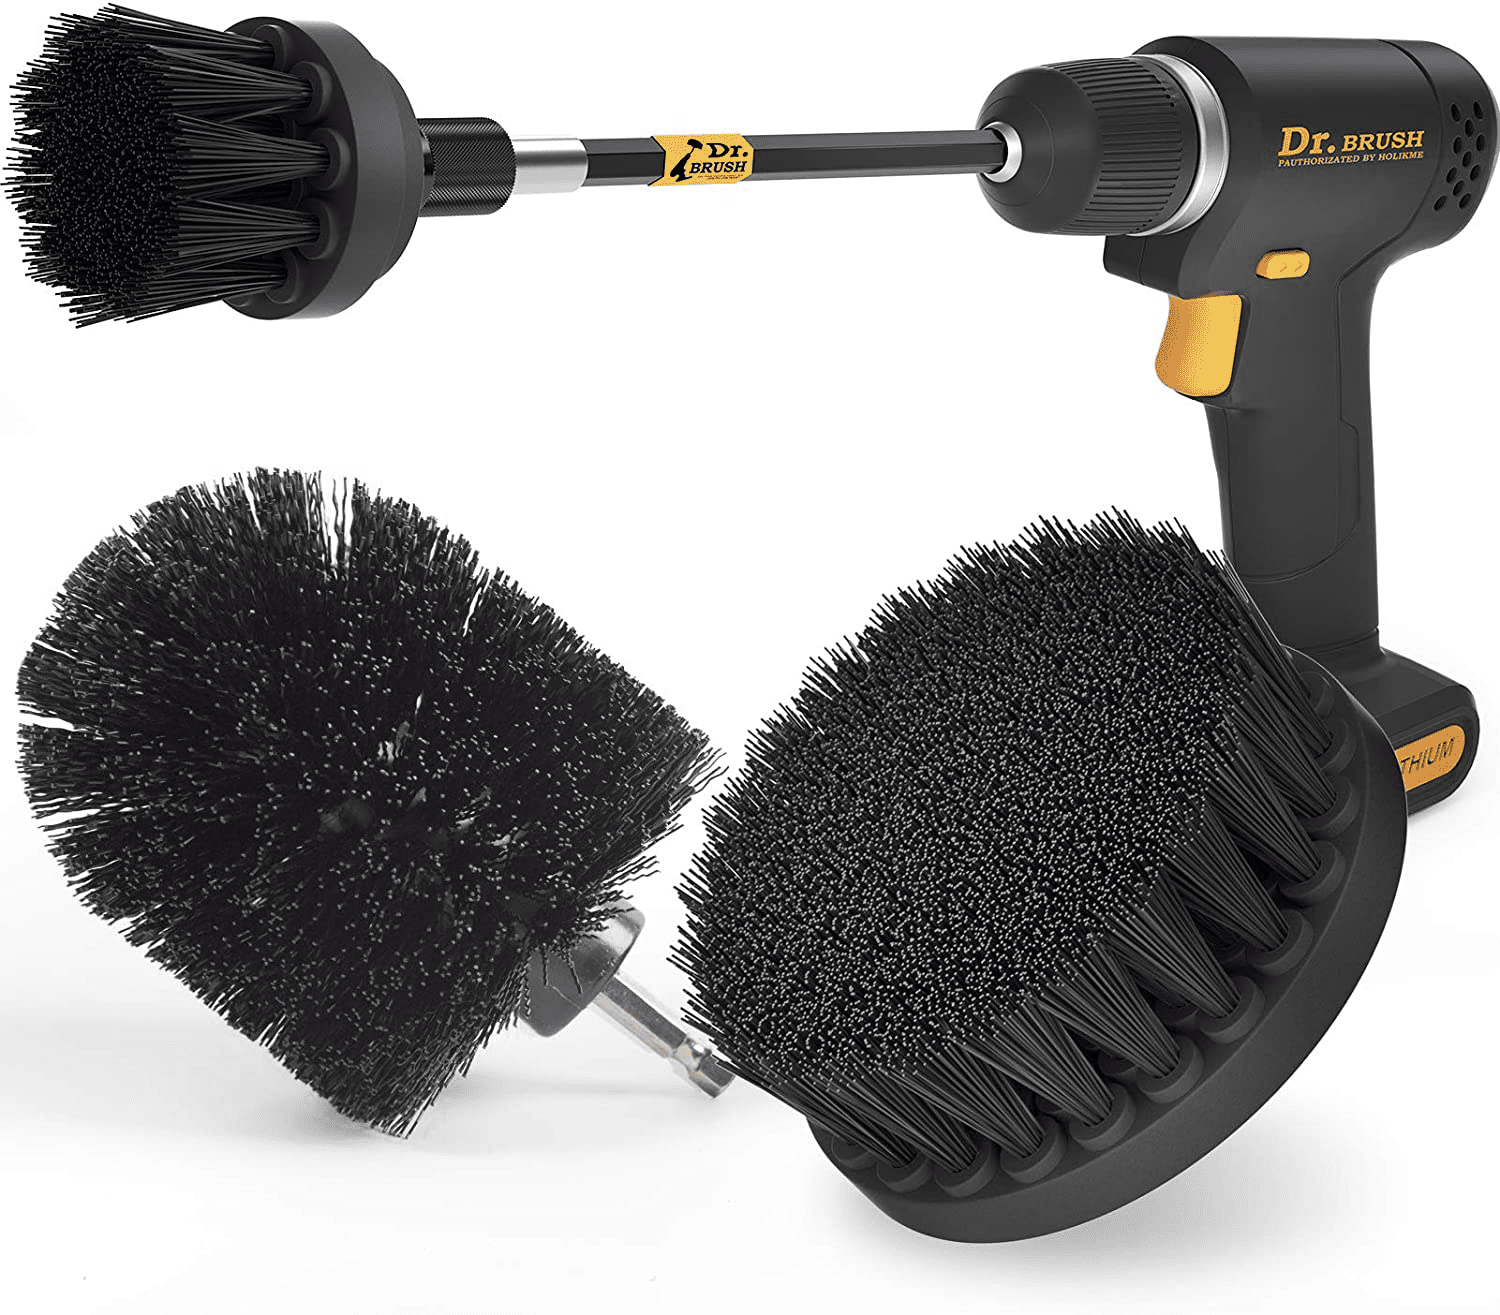 Cleaning Drill Brush Set, 4 Pack Power Scrubber Brush Set, Drill Brush  Attachment for Power Drill, mobzio All Purpose Drill Scrubber Brush Kit for